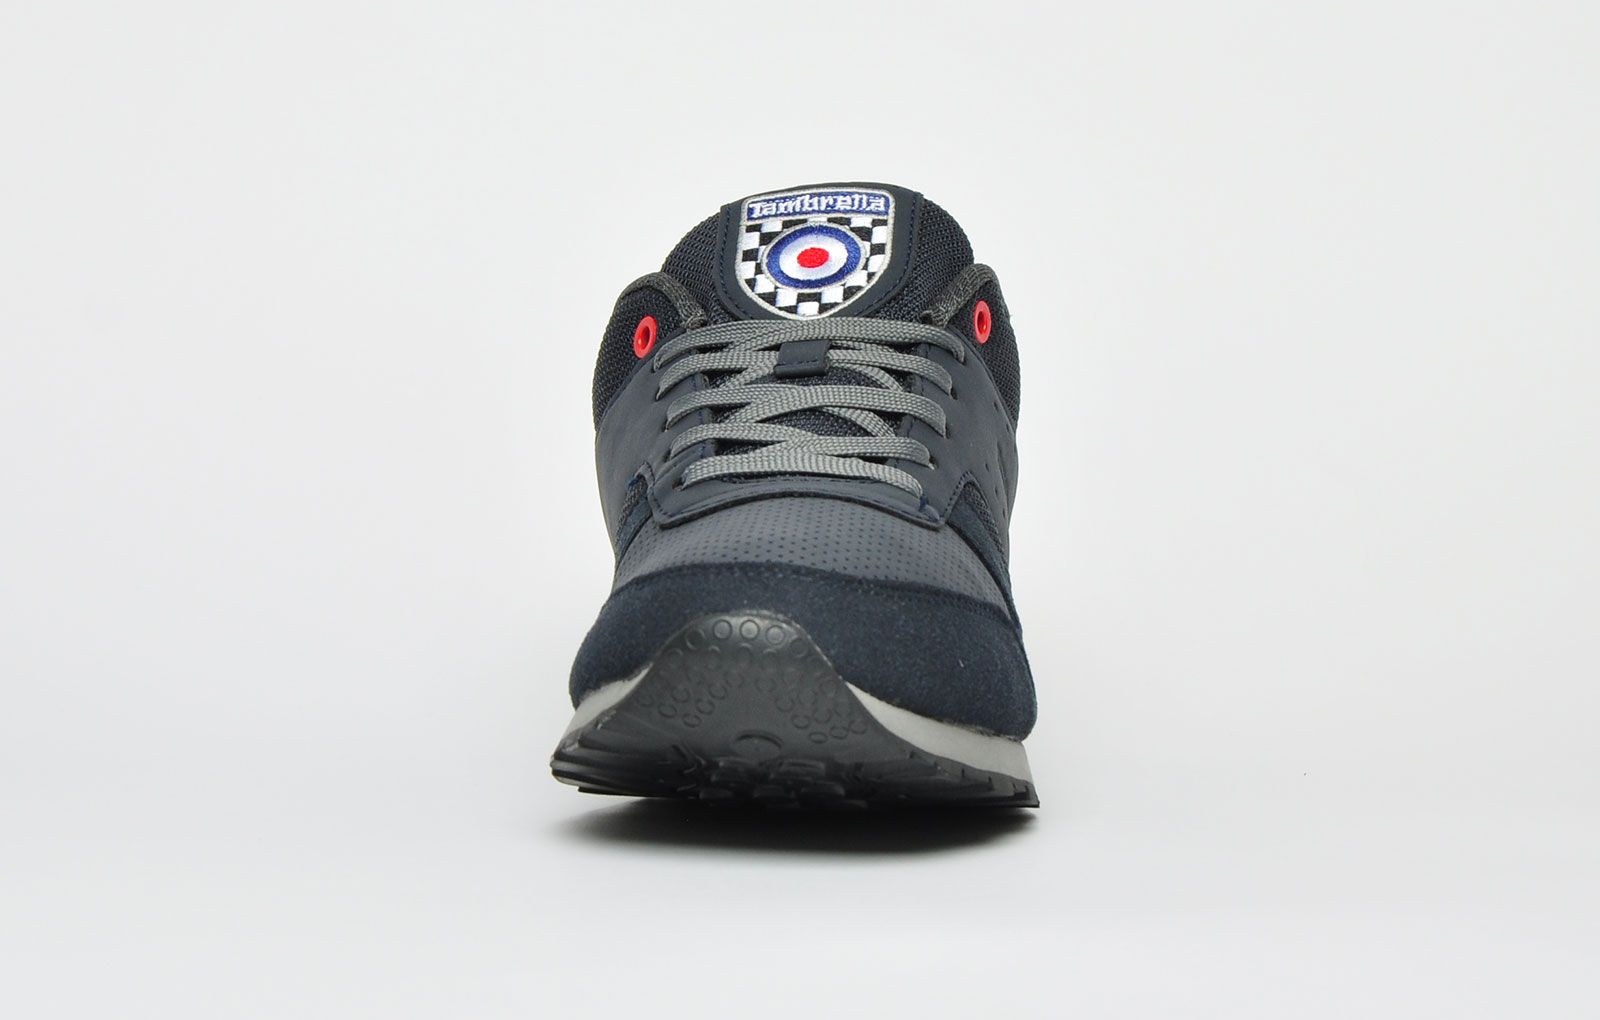 <p> Sleek re-imagining of an iconic Classic 80's runner, these Echo Runner Classic trainers give the Lambretta Italian image a modern classic flare that's all the rage this season. So put these kicks on for general everyday wear and you’re sure to turn heads The navy upper with fine stitch detailing makes this trainer a fresh and effective look to finish off any casual or high performance wear. This trainer features a visible supportive heel clip, Lambretta branding throughout and an authentic Lambretta Memory Foam footbed, securing both style and comfort whatever you use them for. <br></p><p><br> </p><p class=